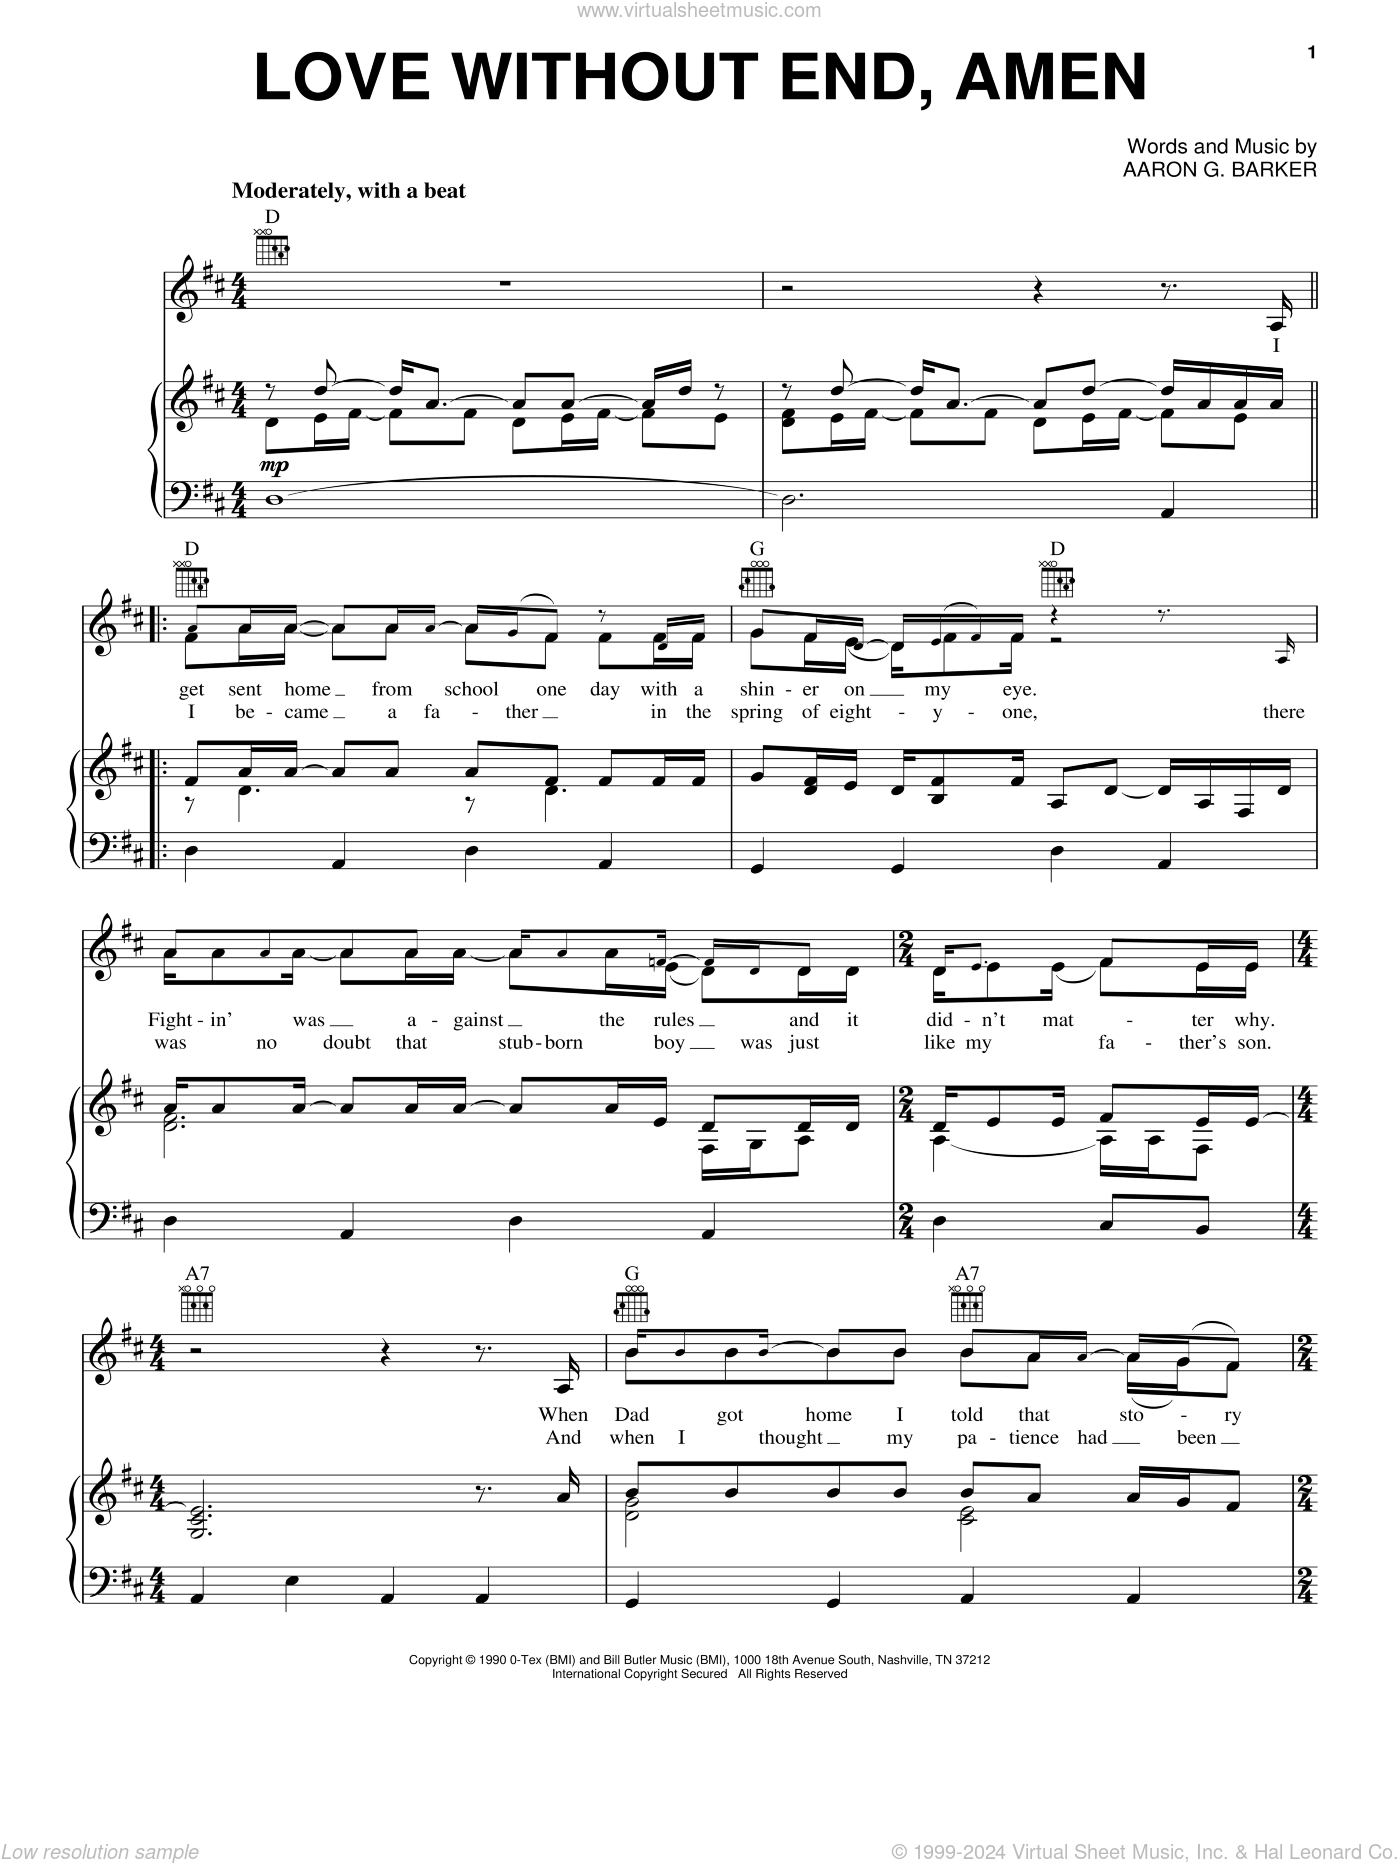 Download and Print Love Without End, Amen sheet music for voice, piano or g...